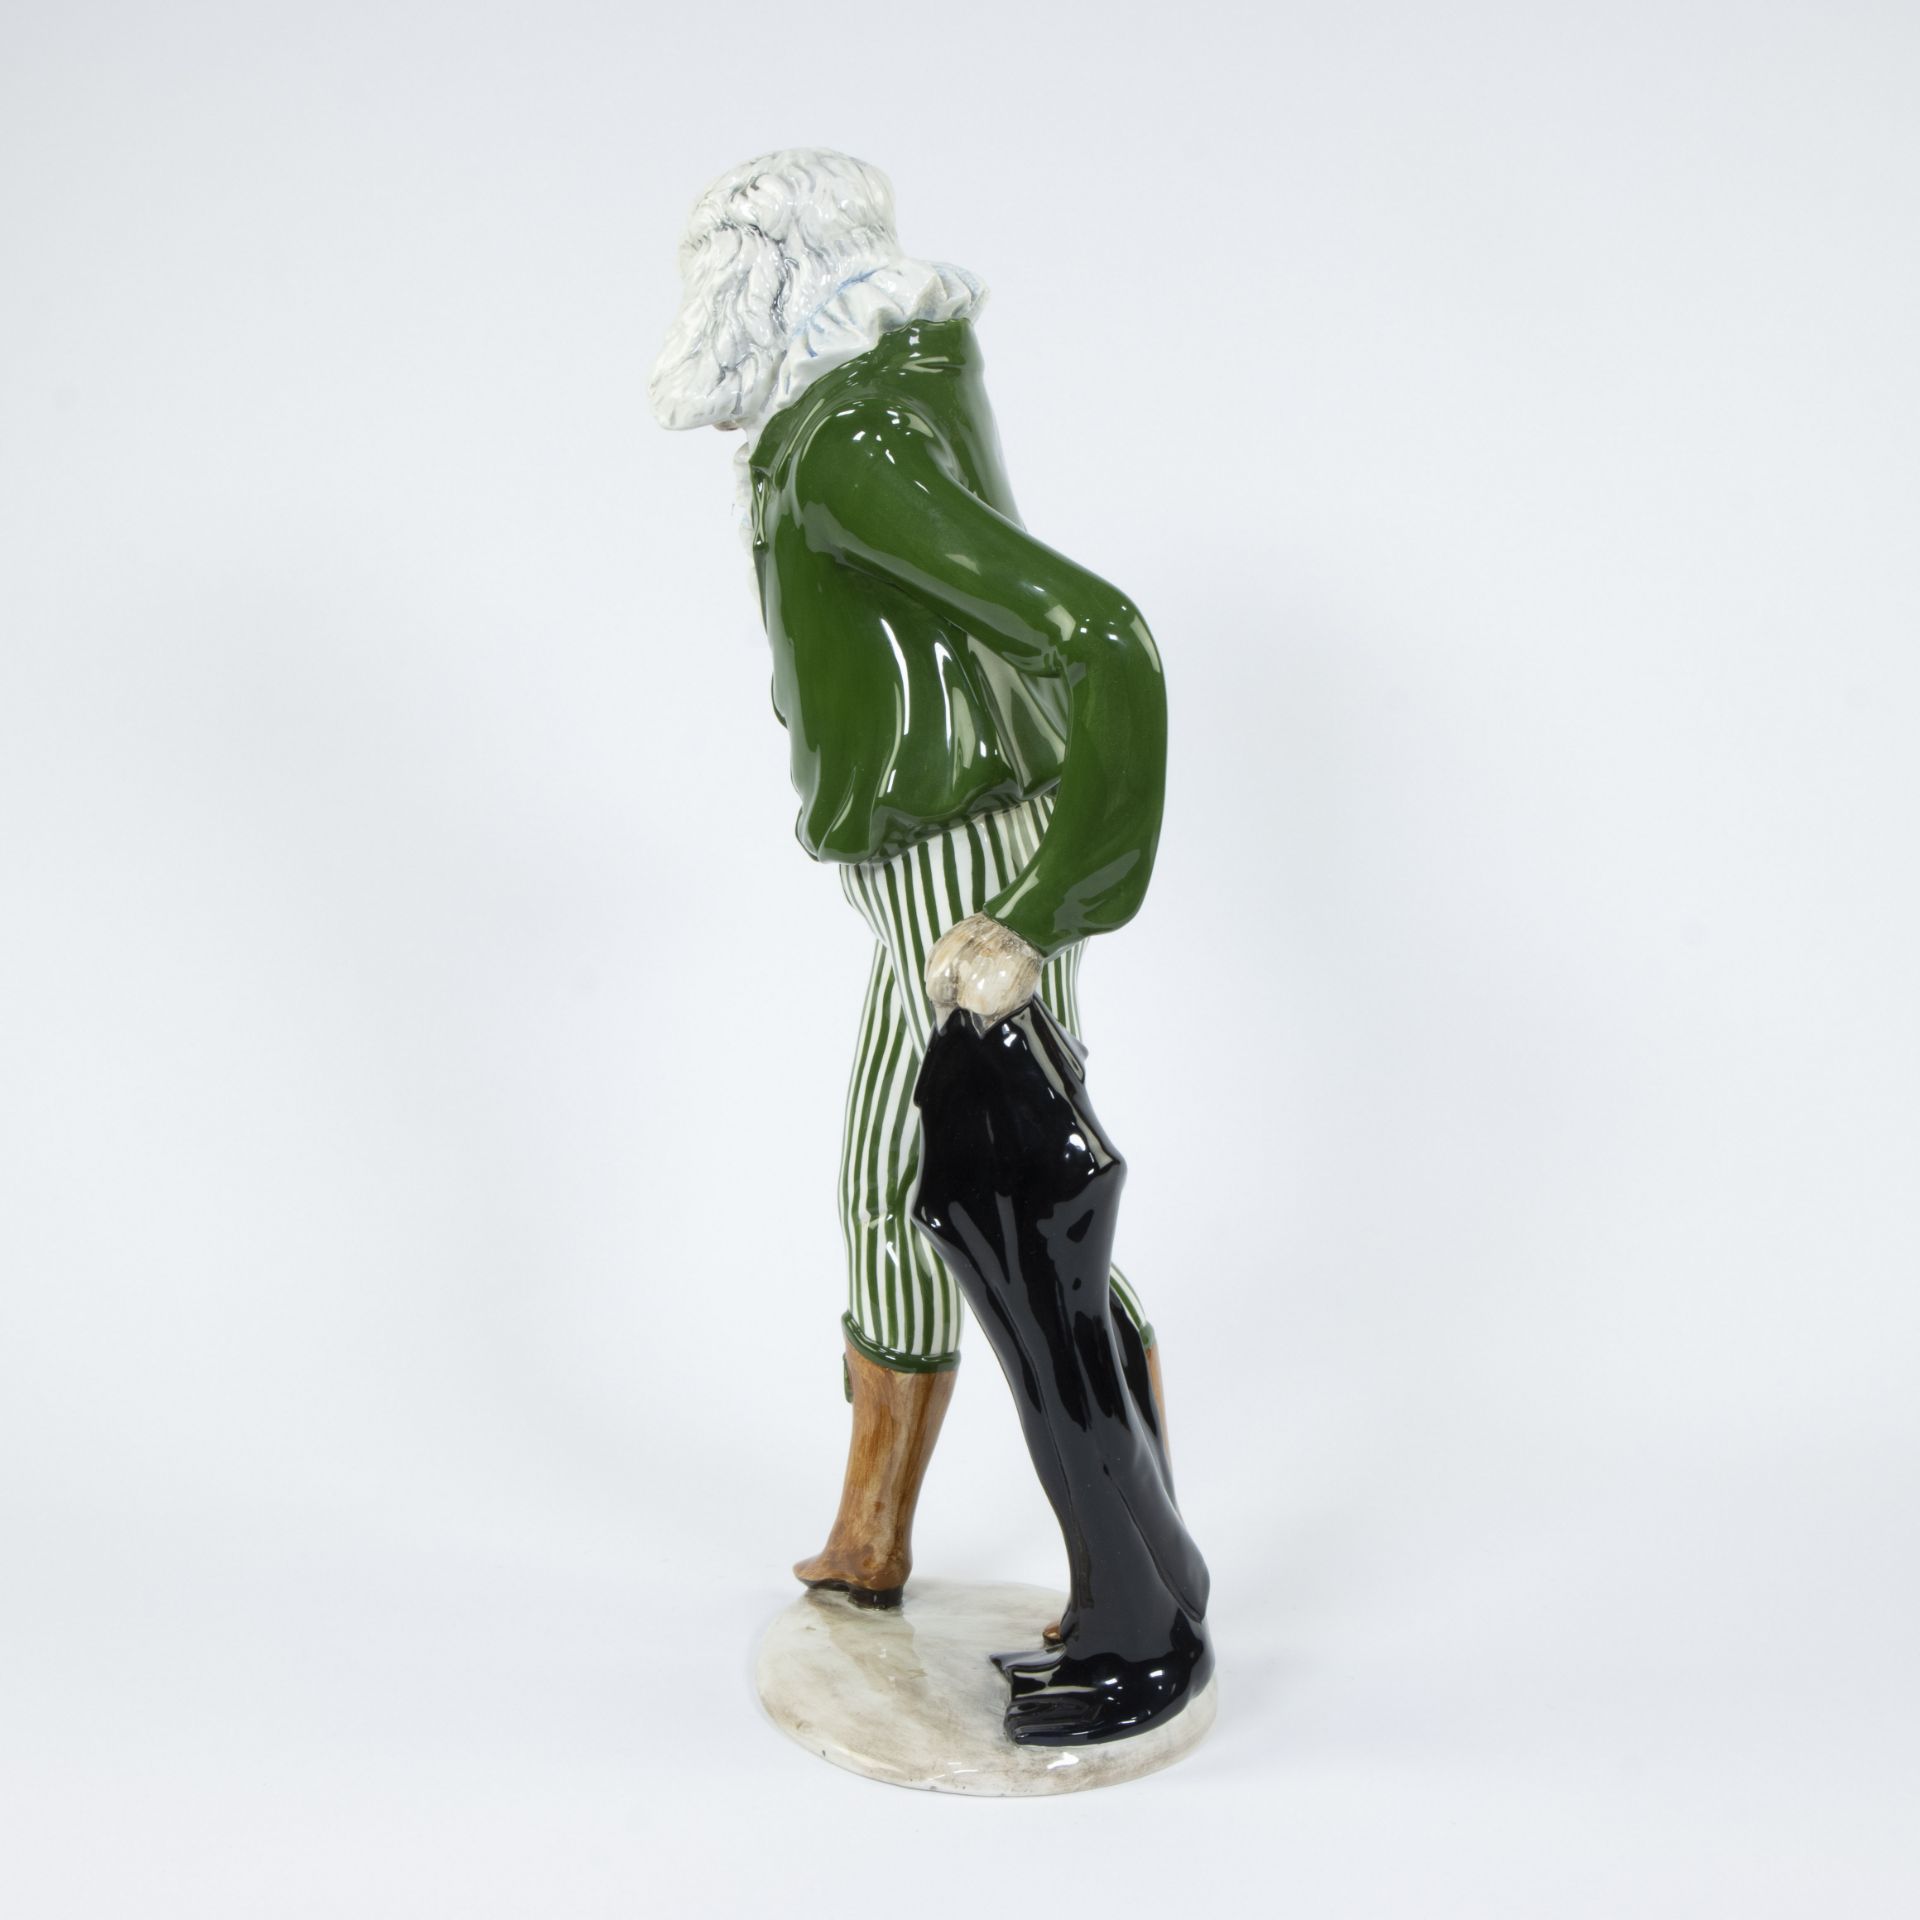 Large ceramic sculpture of a human with the head of a dog, special edition series ‘St Mary Mead’ mod - Image 2 of 5